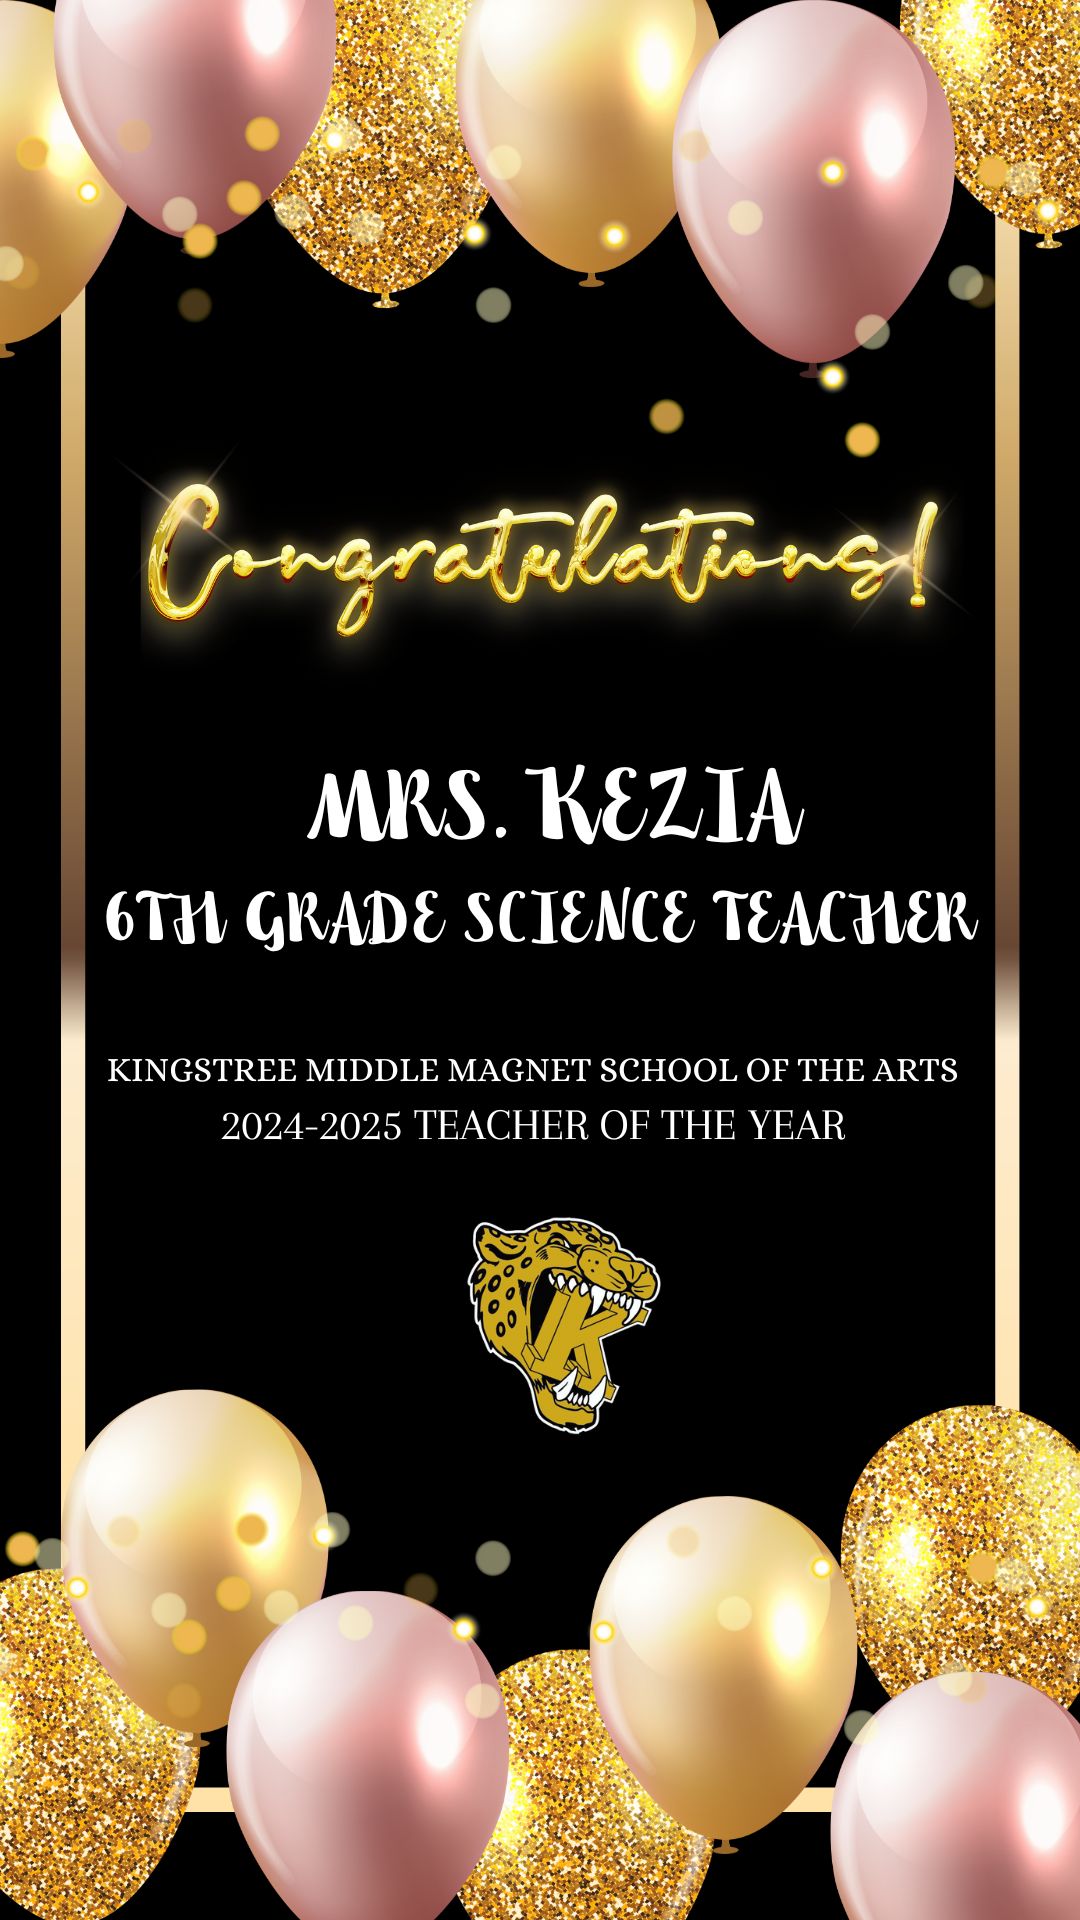 Congratulations Mrs. Kezia 6th Grade Science Teacher Kingstree Middle Magnet School of the Arts 2024-2025 Teacher of the Year